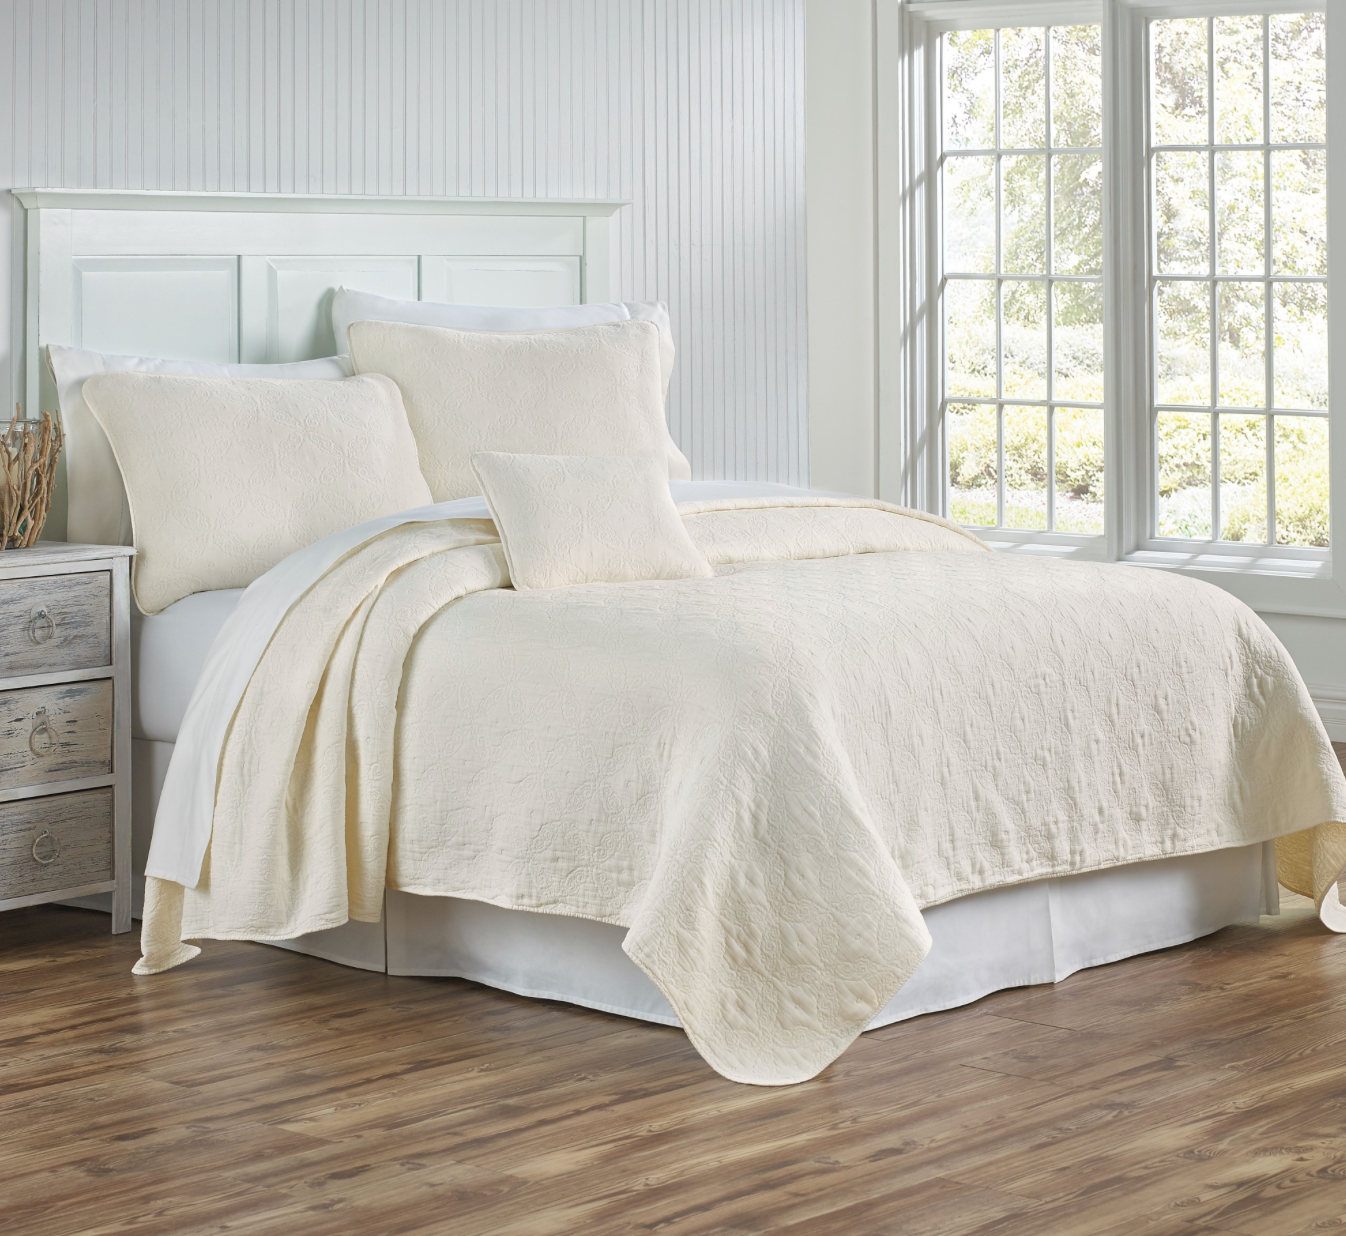 Whitney matelassé coverlets by Traditions Linens